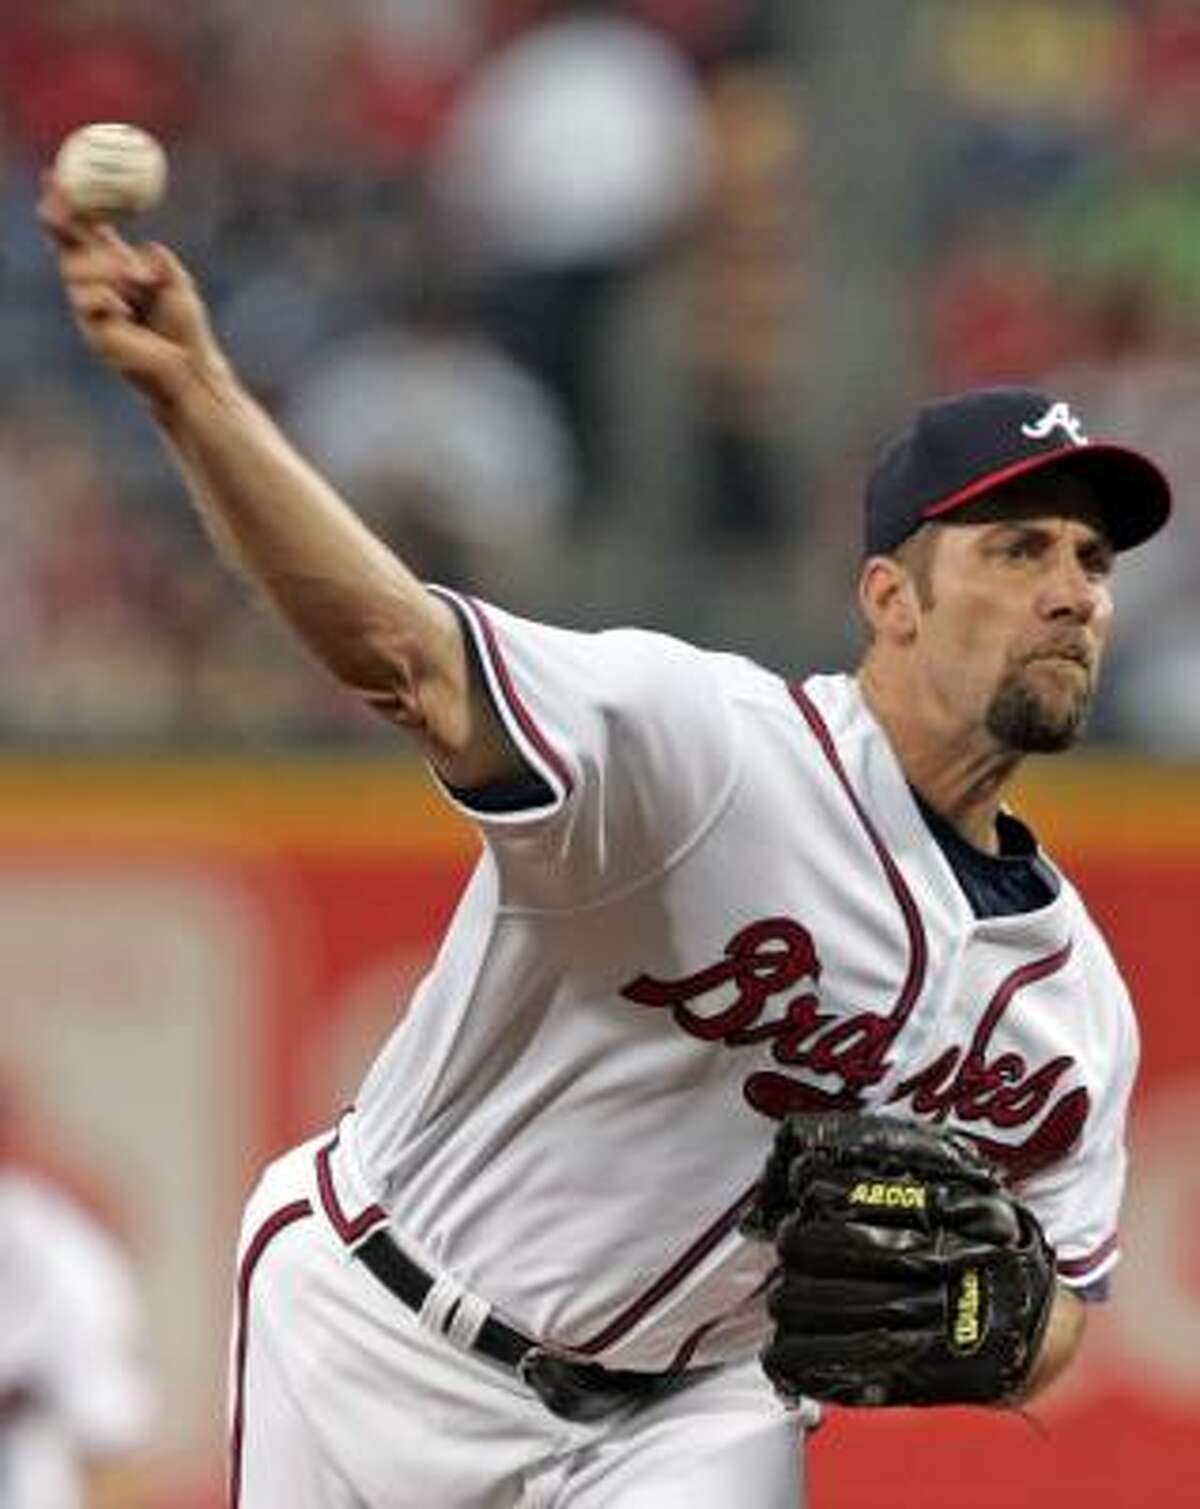 Atlanta's John Smoltz pitched seven strong innings as the Braves shut out Los Angeles 4-0 on Friday night.